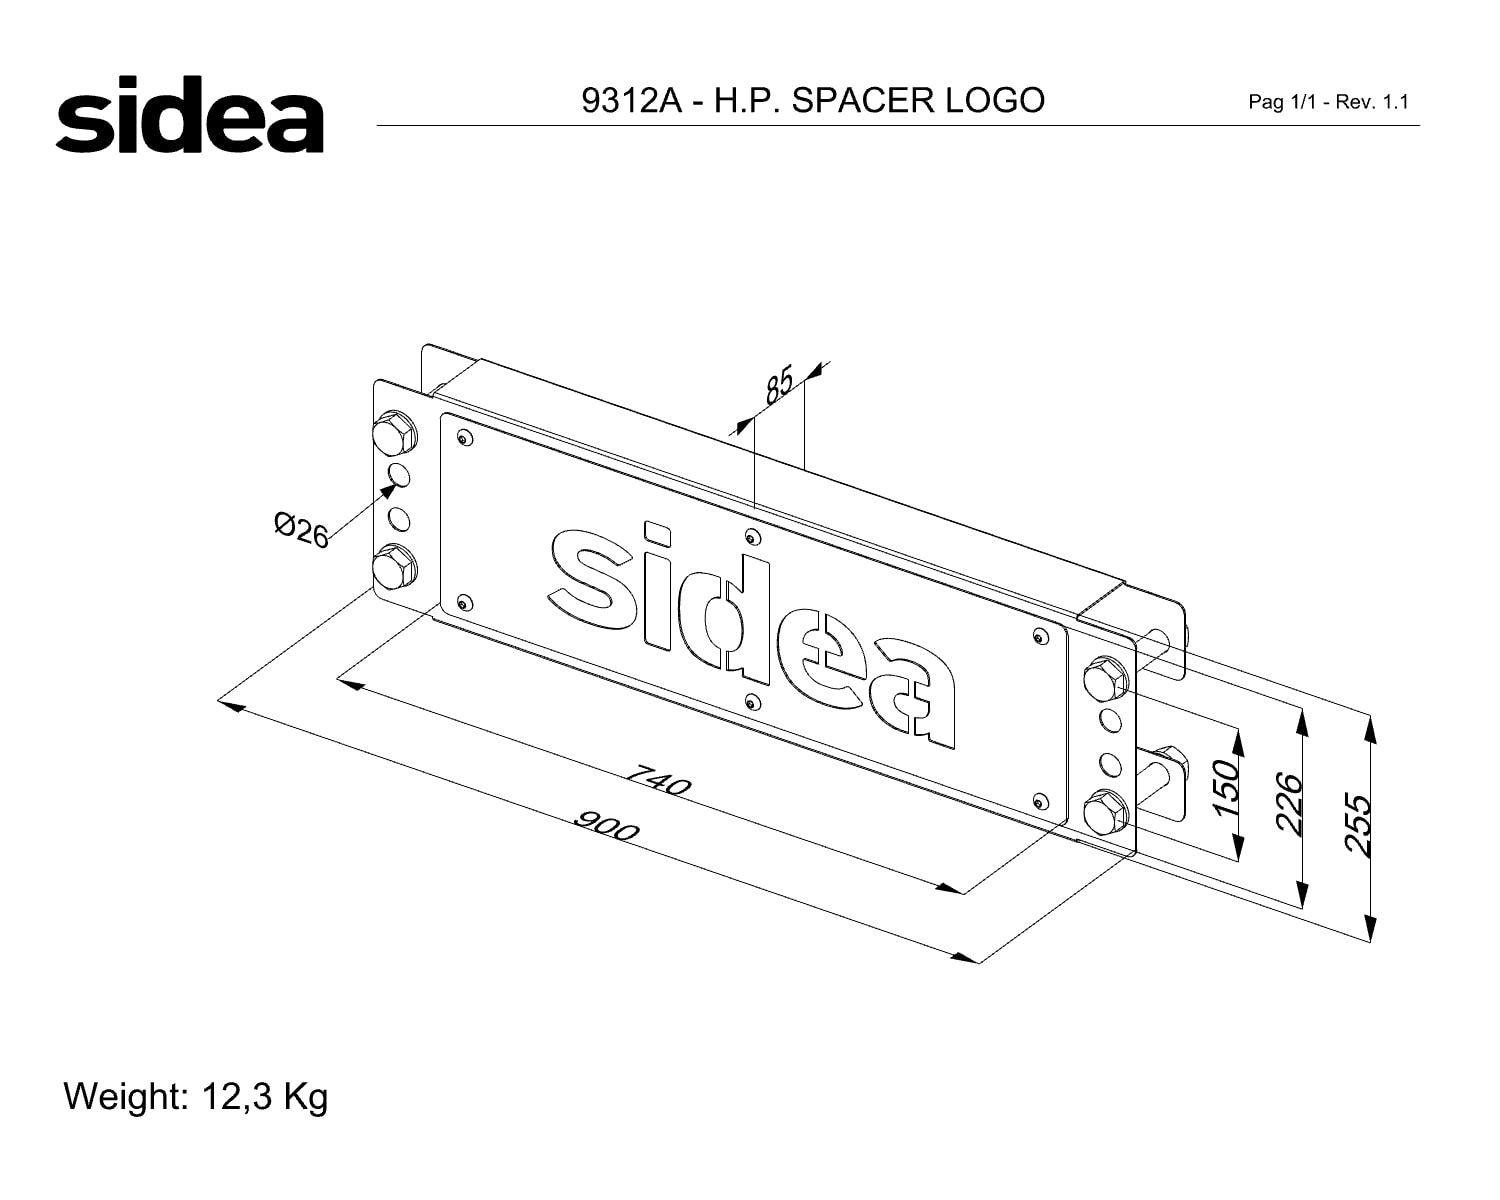 9312A - QUOTE - H.P. SPACER LOGO - AGG.25-08-23